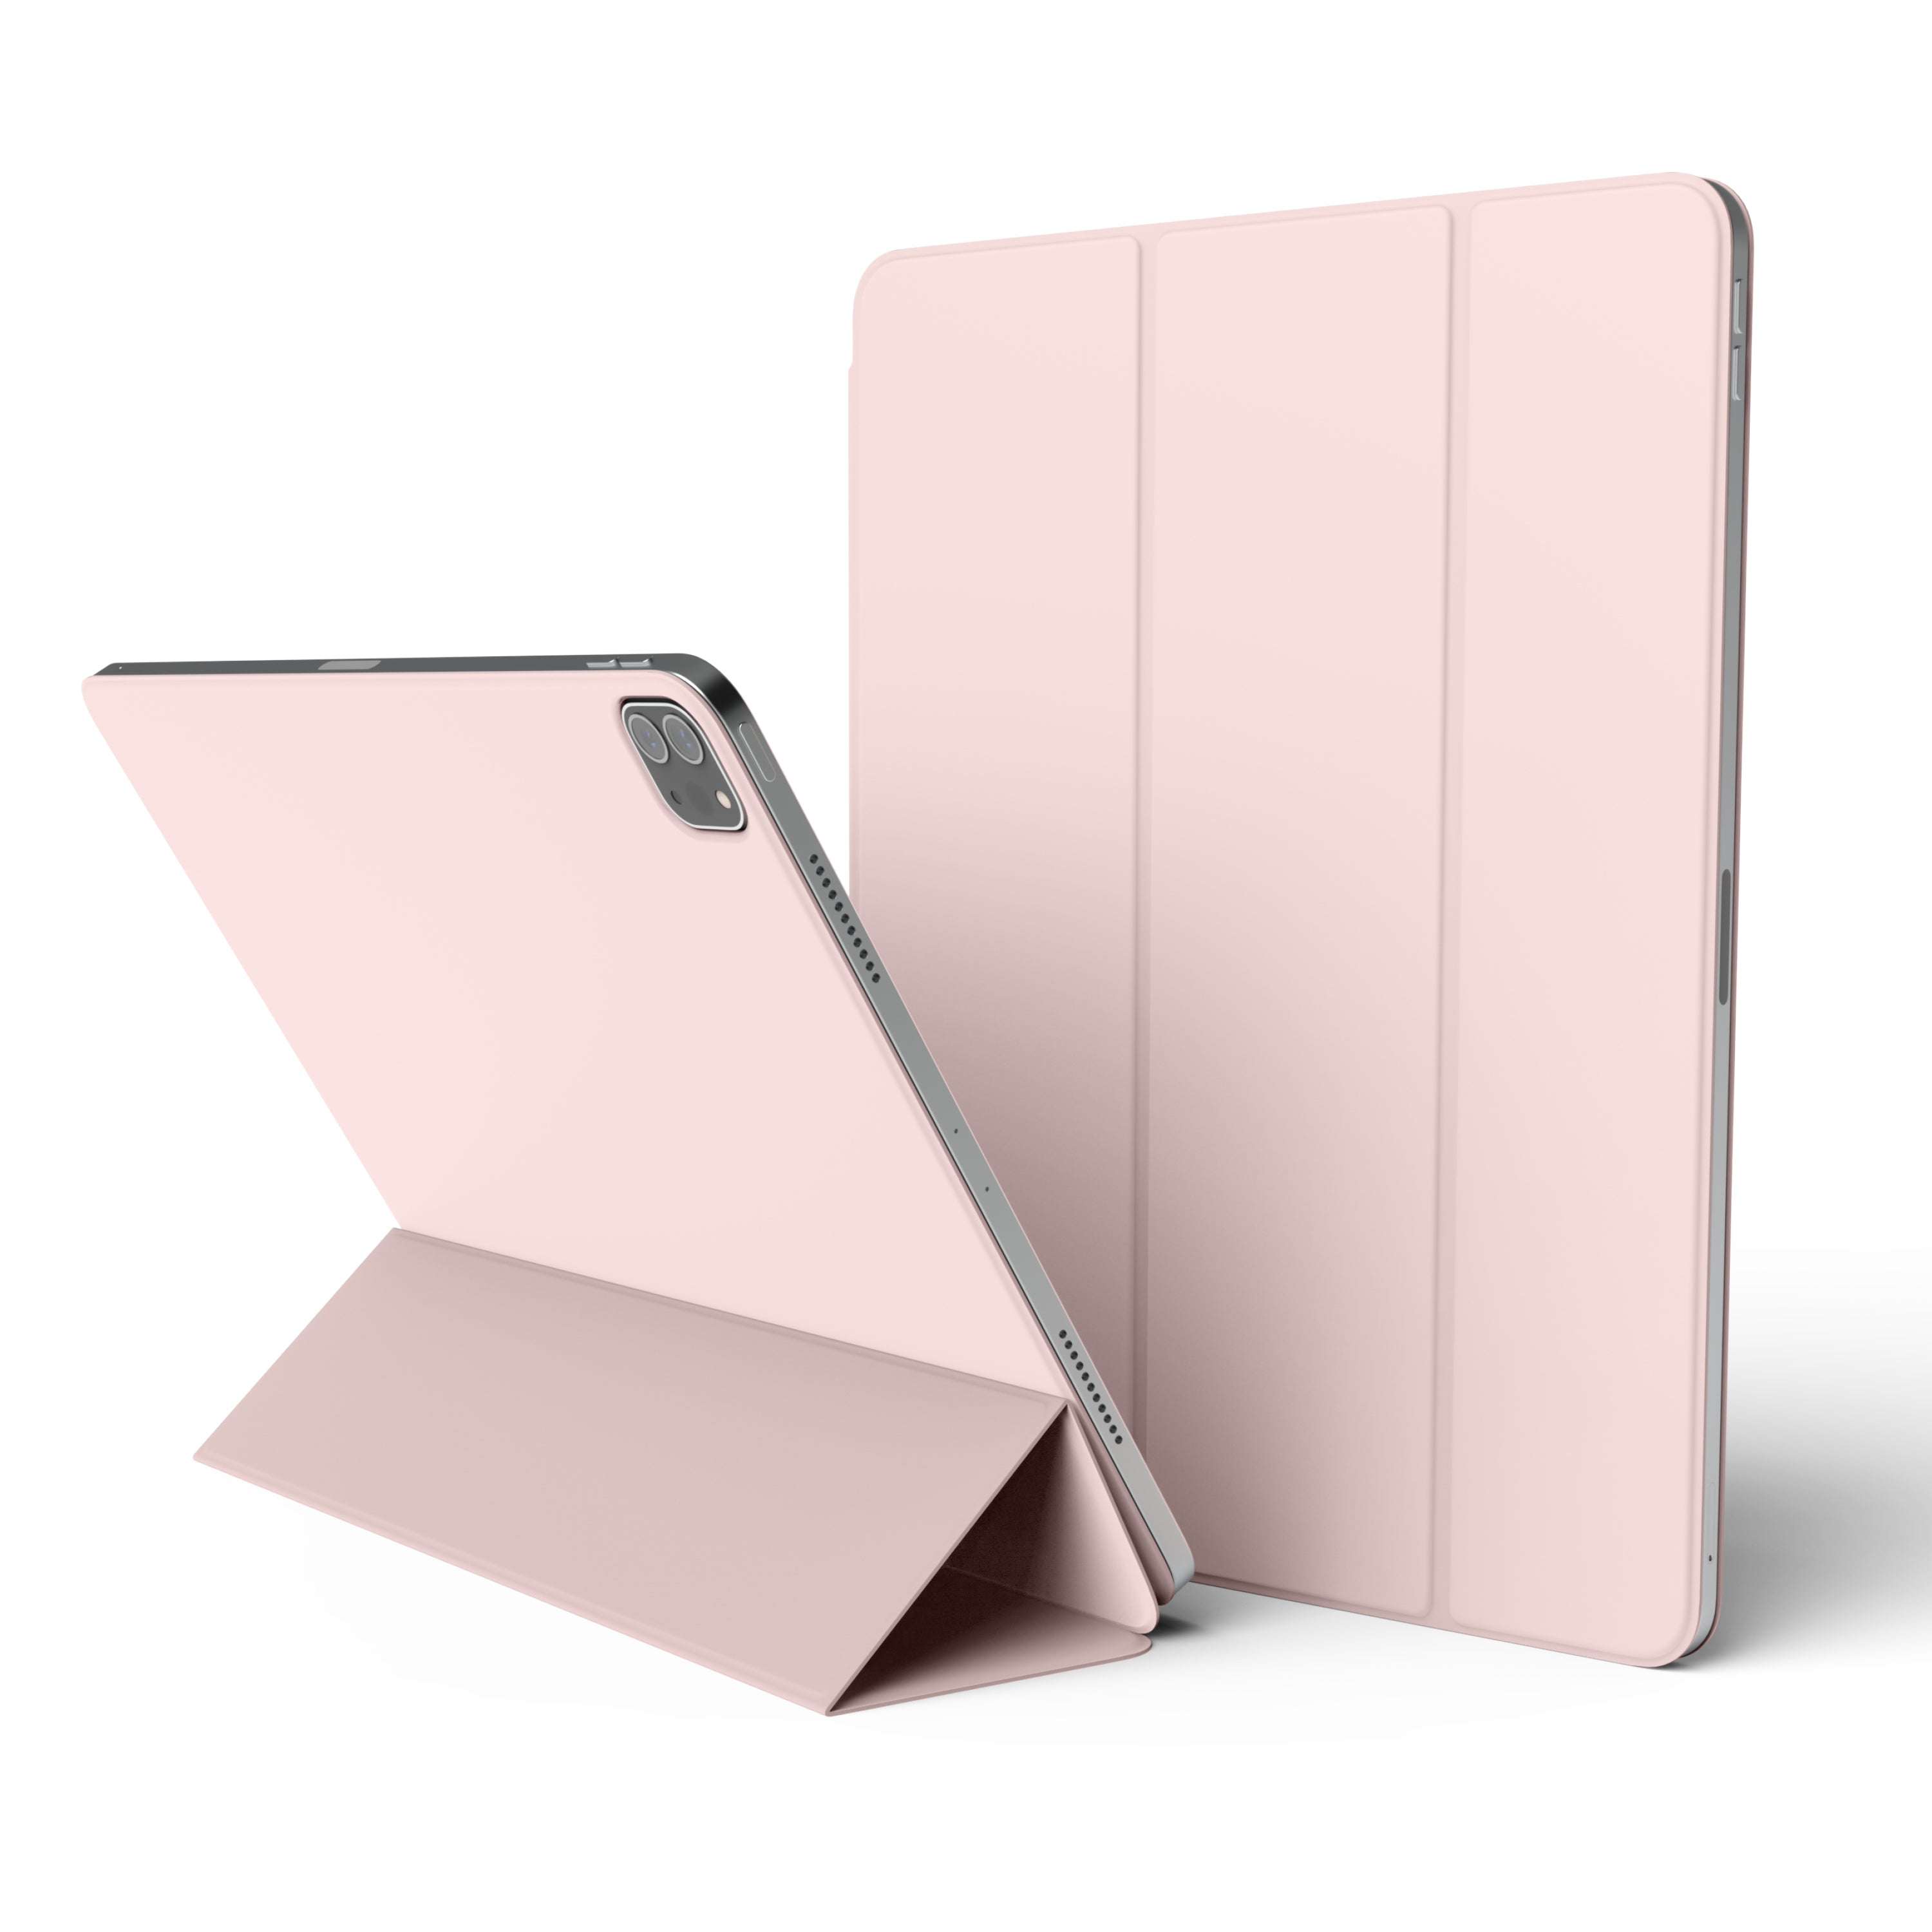 elago Smart Folio Case for iPad Pro 12.9 inch 6th, 5th, 4th Generation - Compatible with Apple Pencil and elagos Pencil Case, Protective Smart Cover